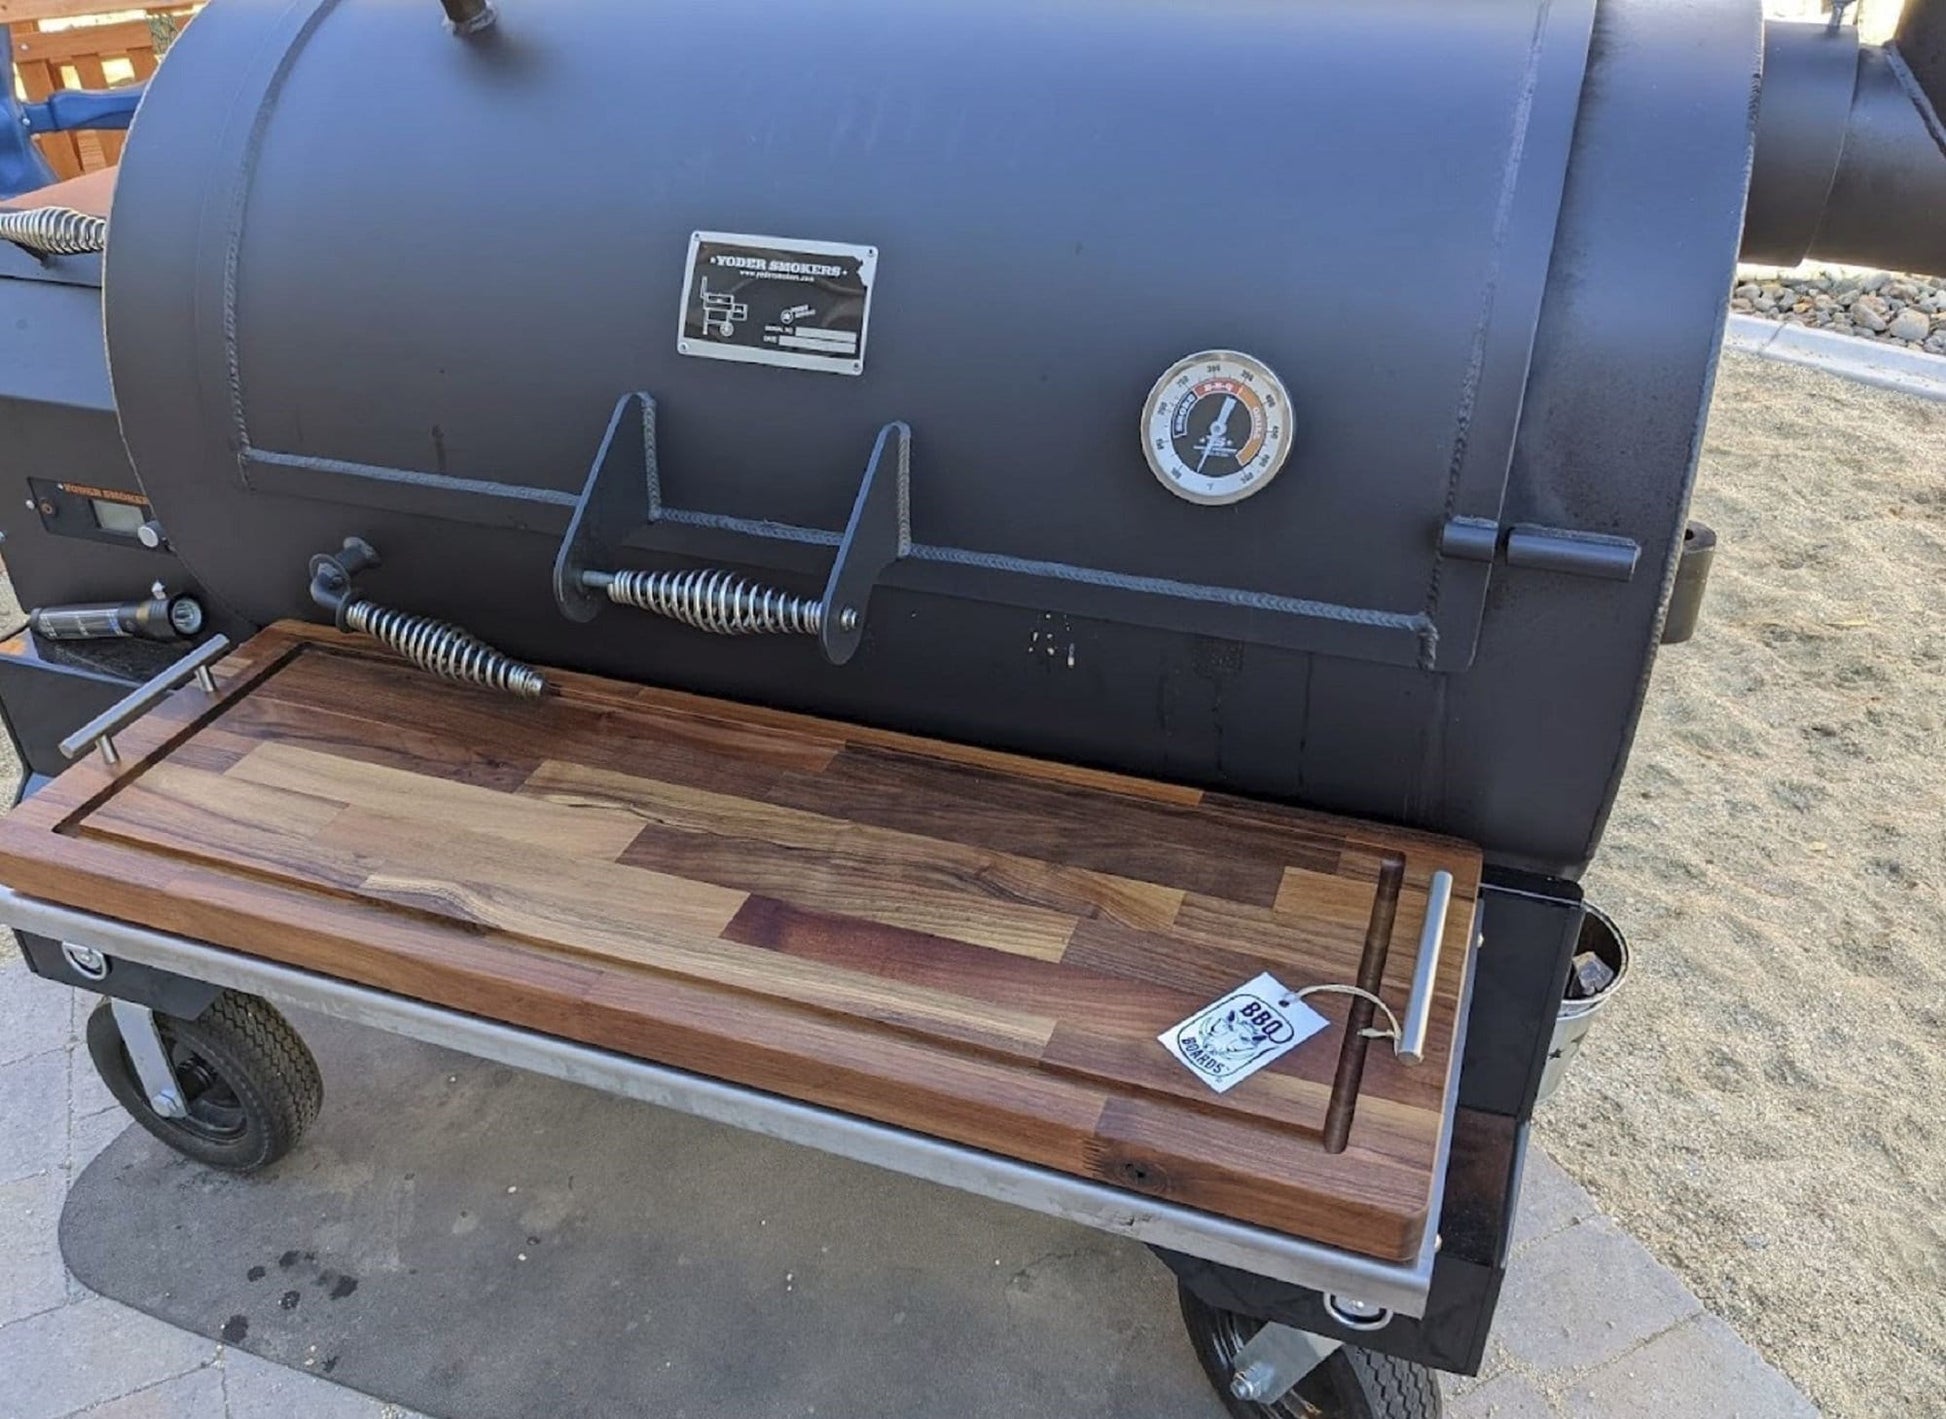 My New Yoder YS1500s Smoker - Assembly & Burn In 